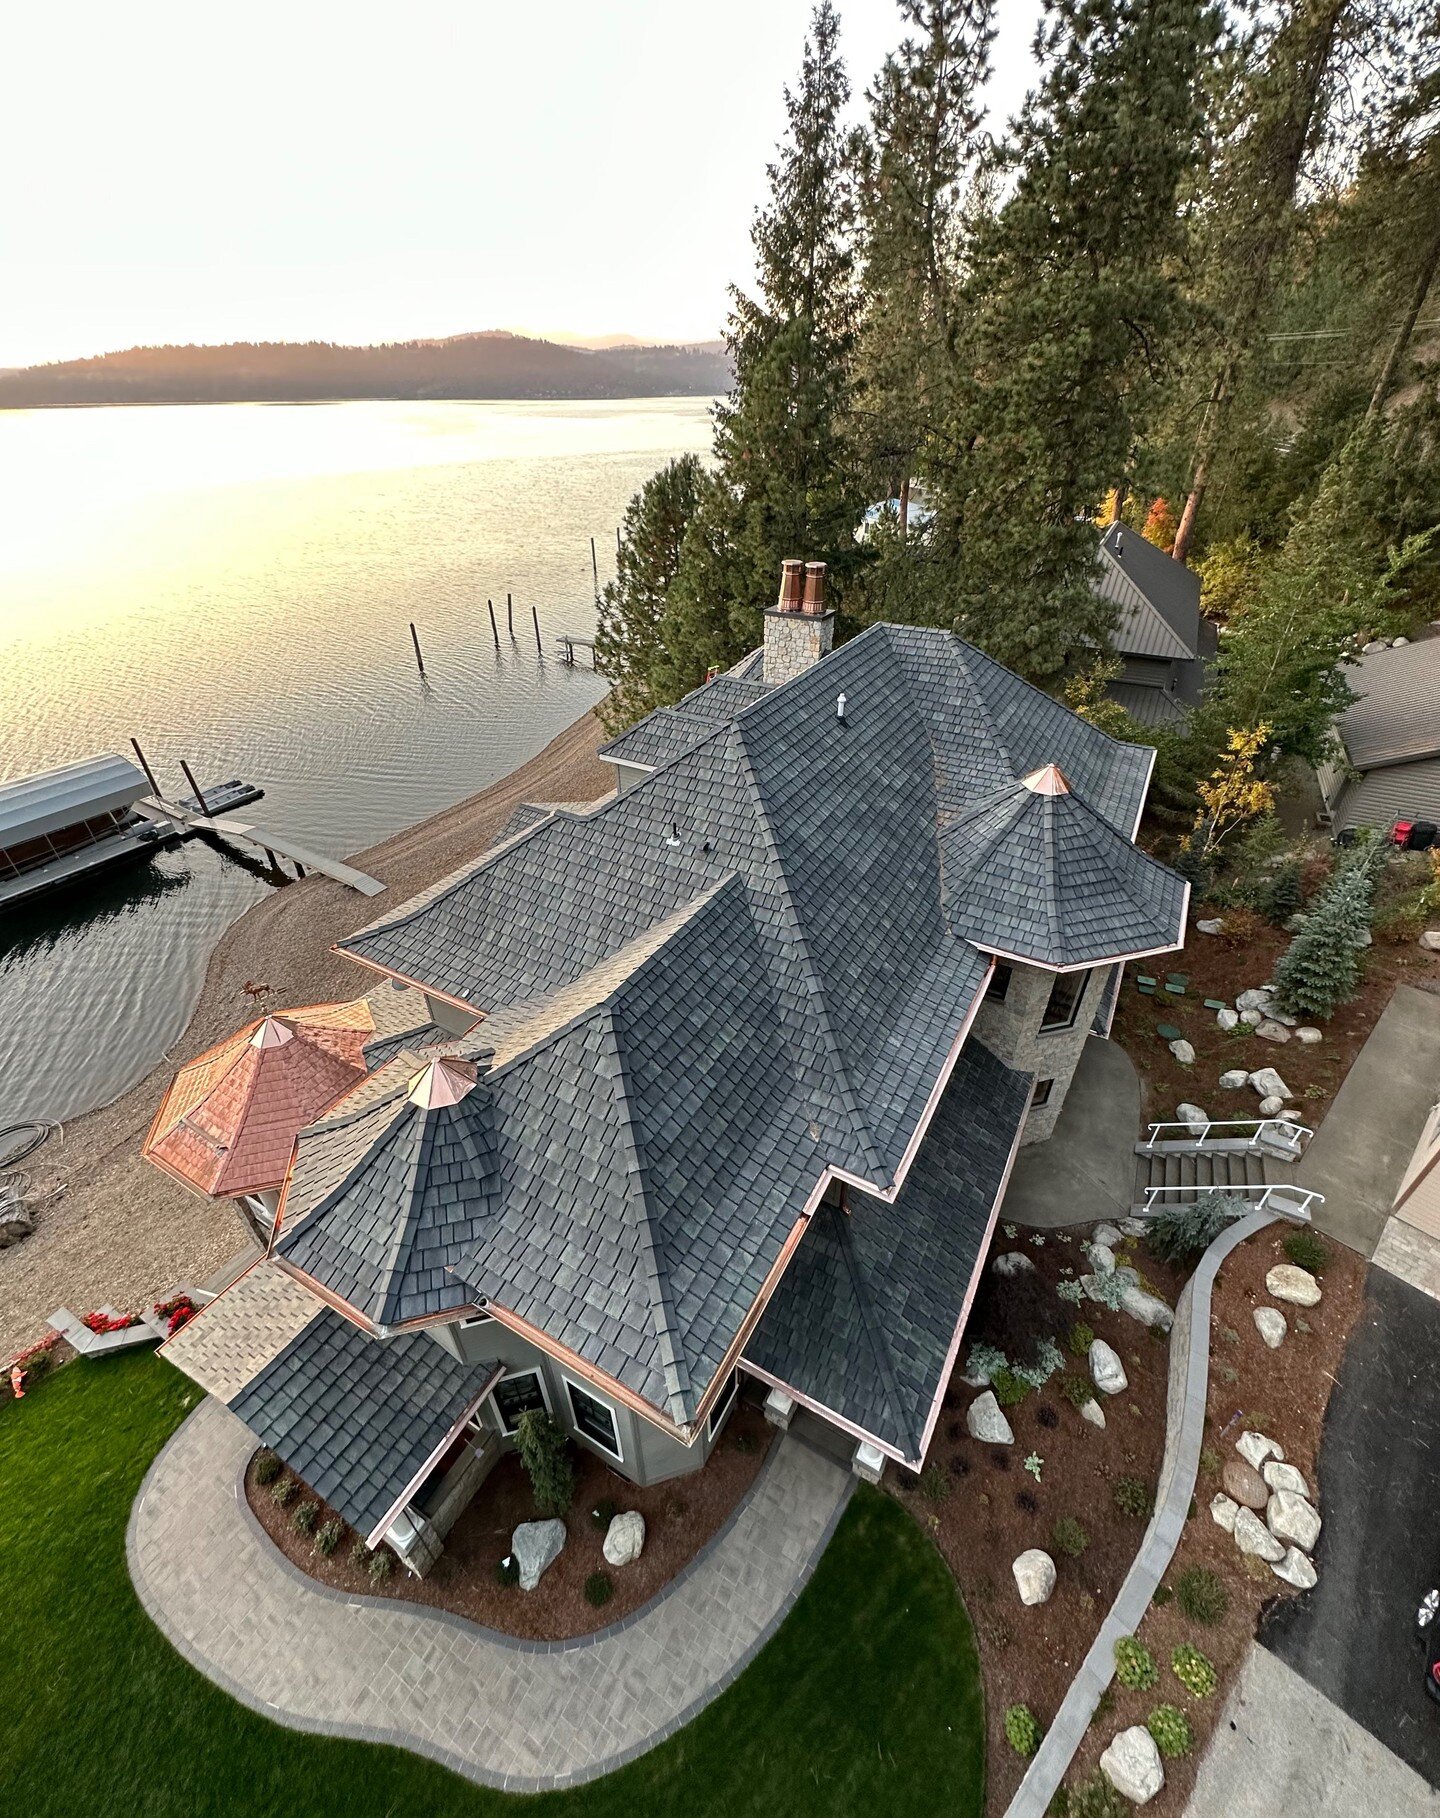 It's more than a house when it's a Johnson Construction home. Who is ready for lake days on CDA Lake? #customhomes #northidaho #custombuilding #CDA